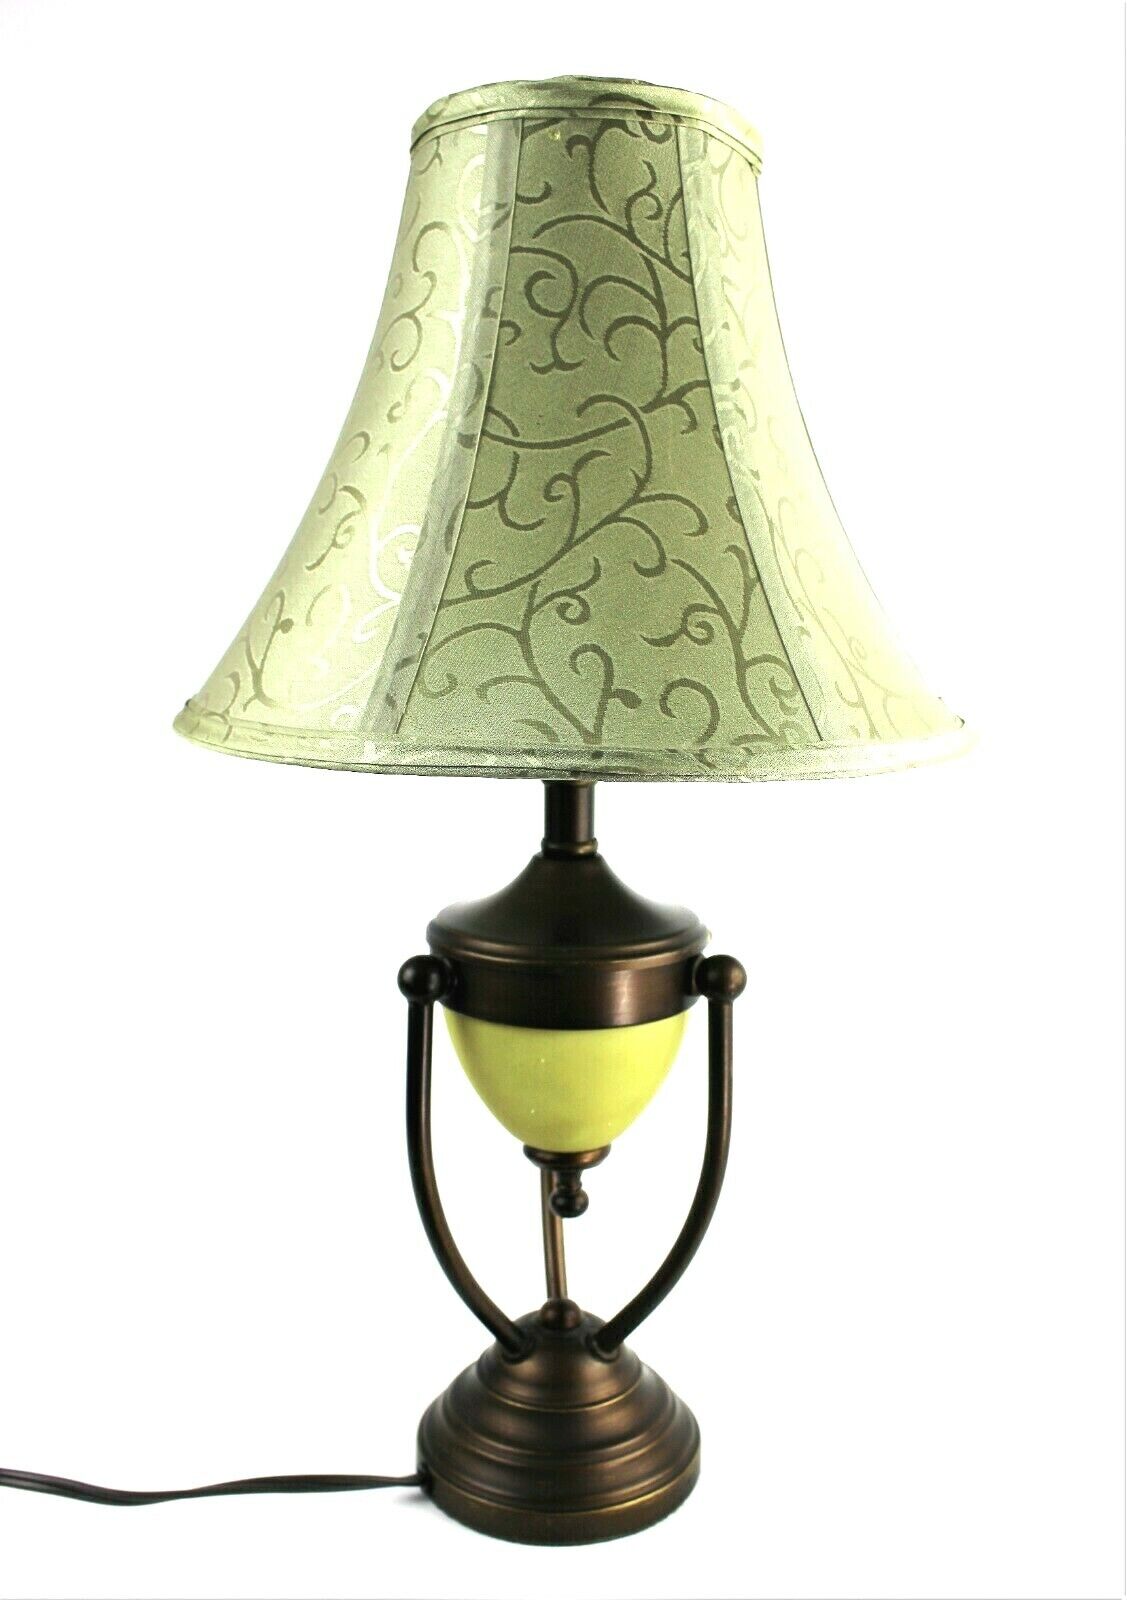 Tuscan Style Table Lamp Portable, Tuscan Inspired Table Lamps